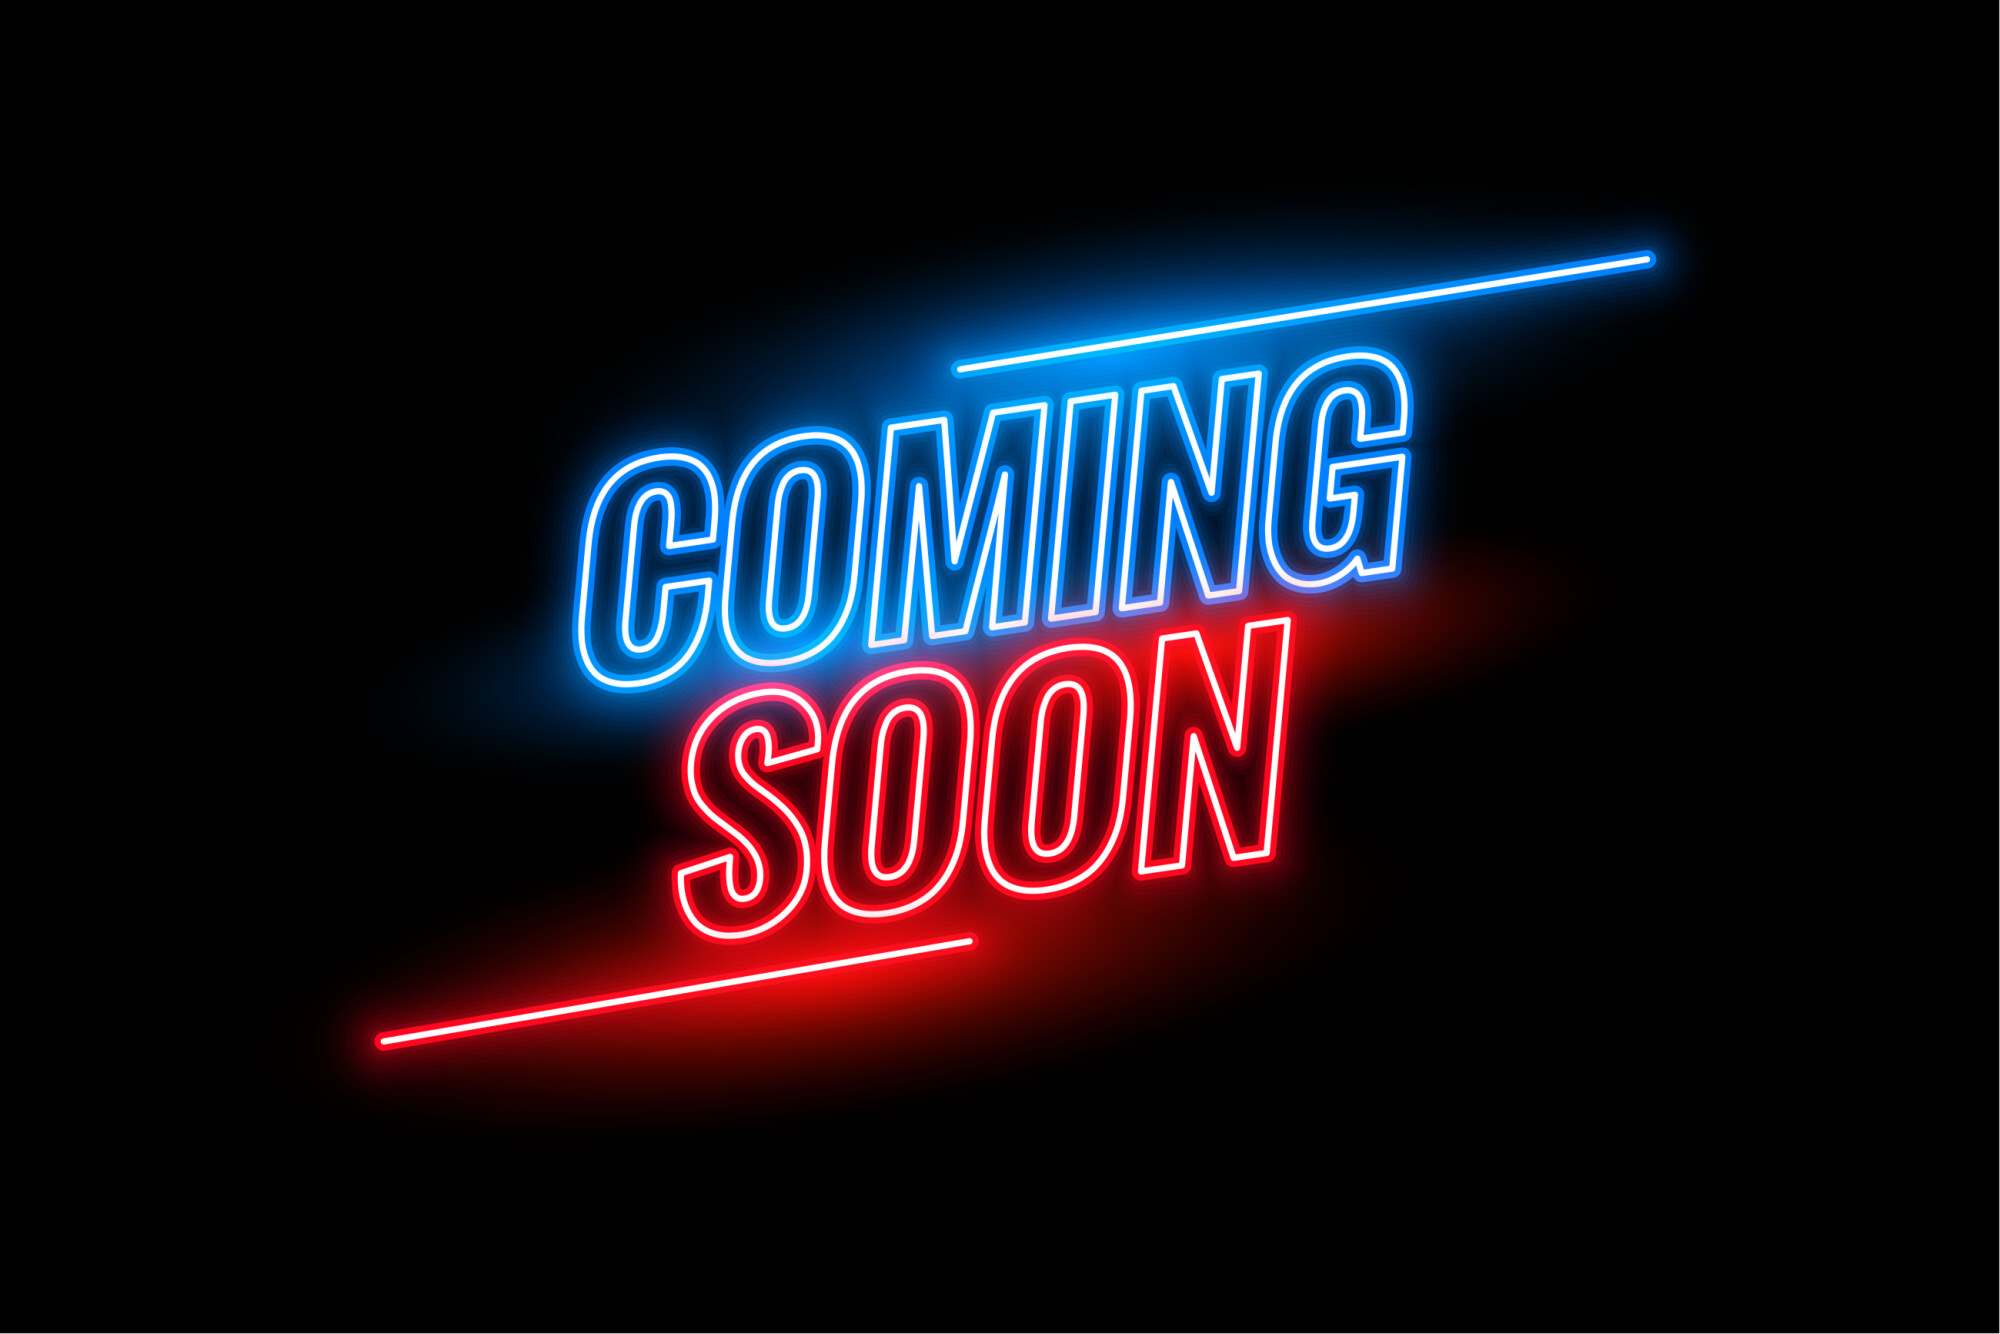 Lighted neon sign saying COMING (in blue letters) SOON (in red letters).